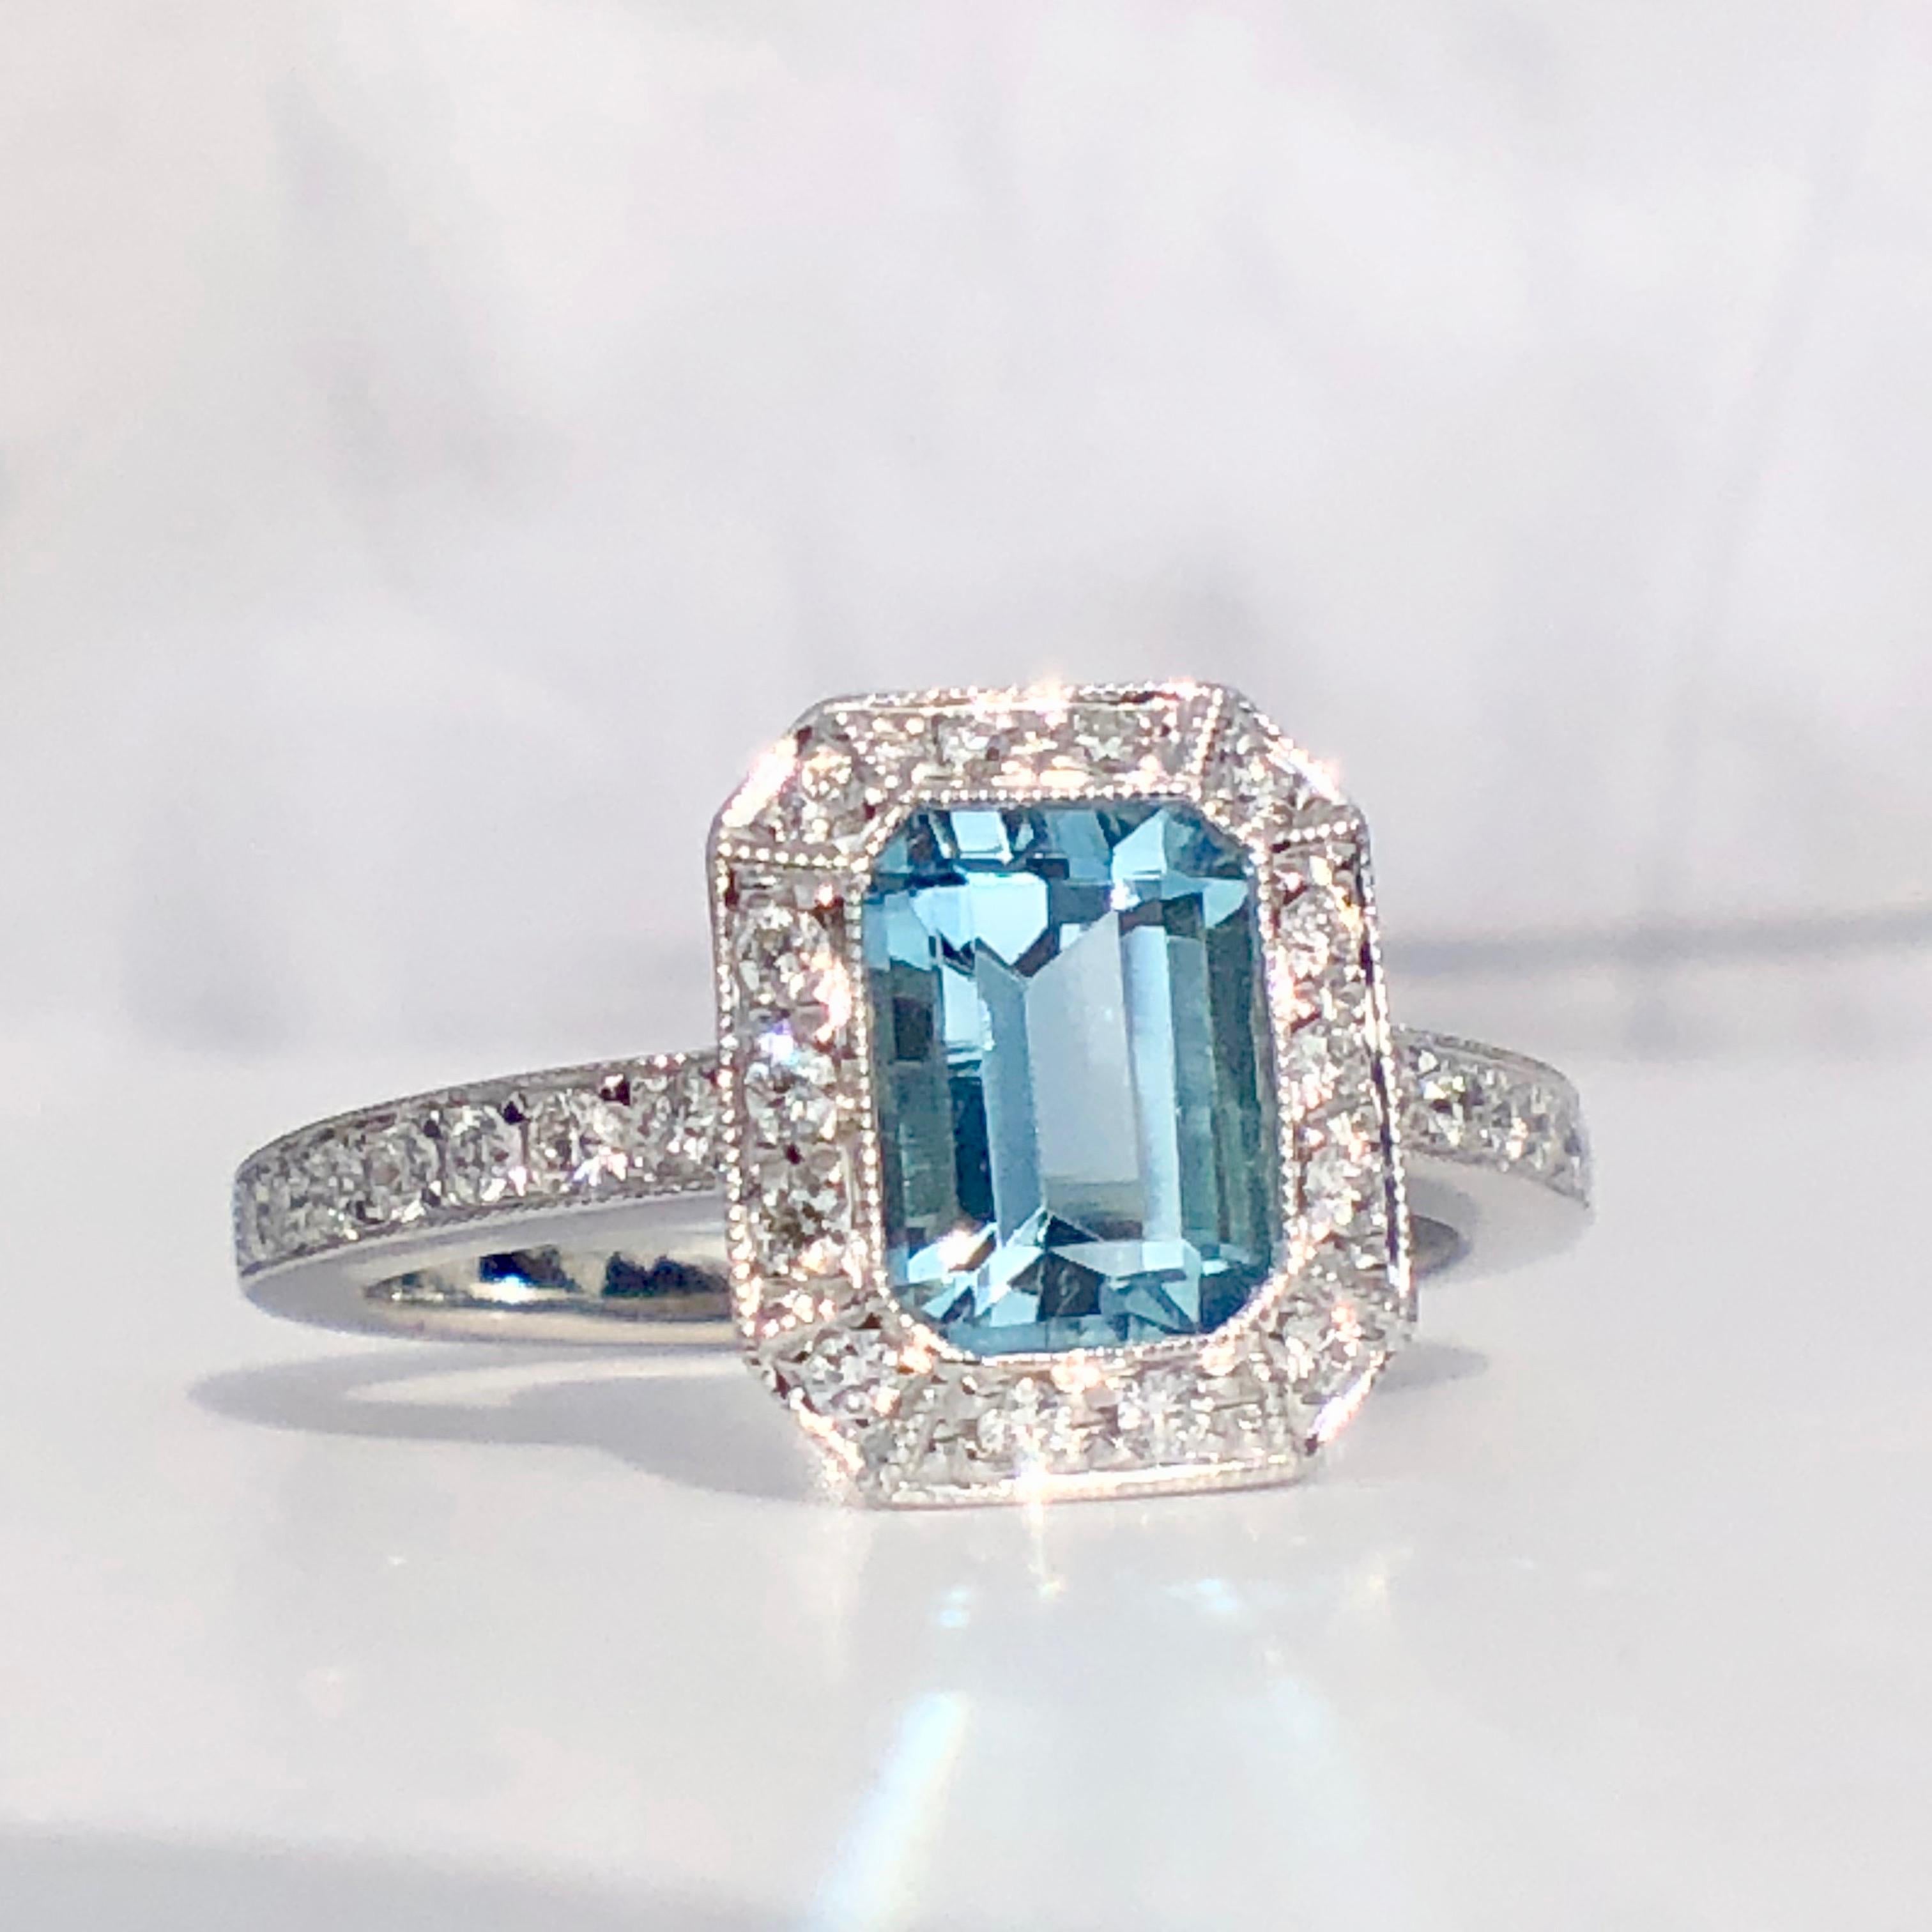 
A Step Cut  Aquamarine With A White Diamond Halo Surround and Diamond Shoulders

Set with a Deep Toned Aquamarine of 1.01ct and .27ct of Diamonds (Stamped to the band)

The birthstone for March Aquamarine 

Aquamarine evokes the purity of